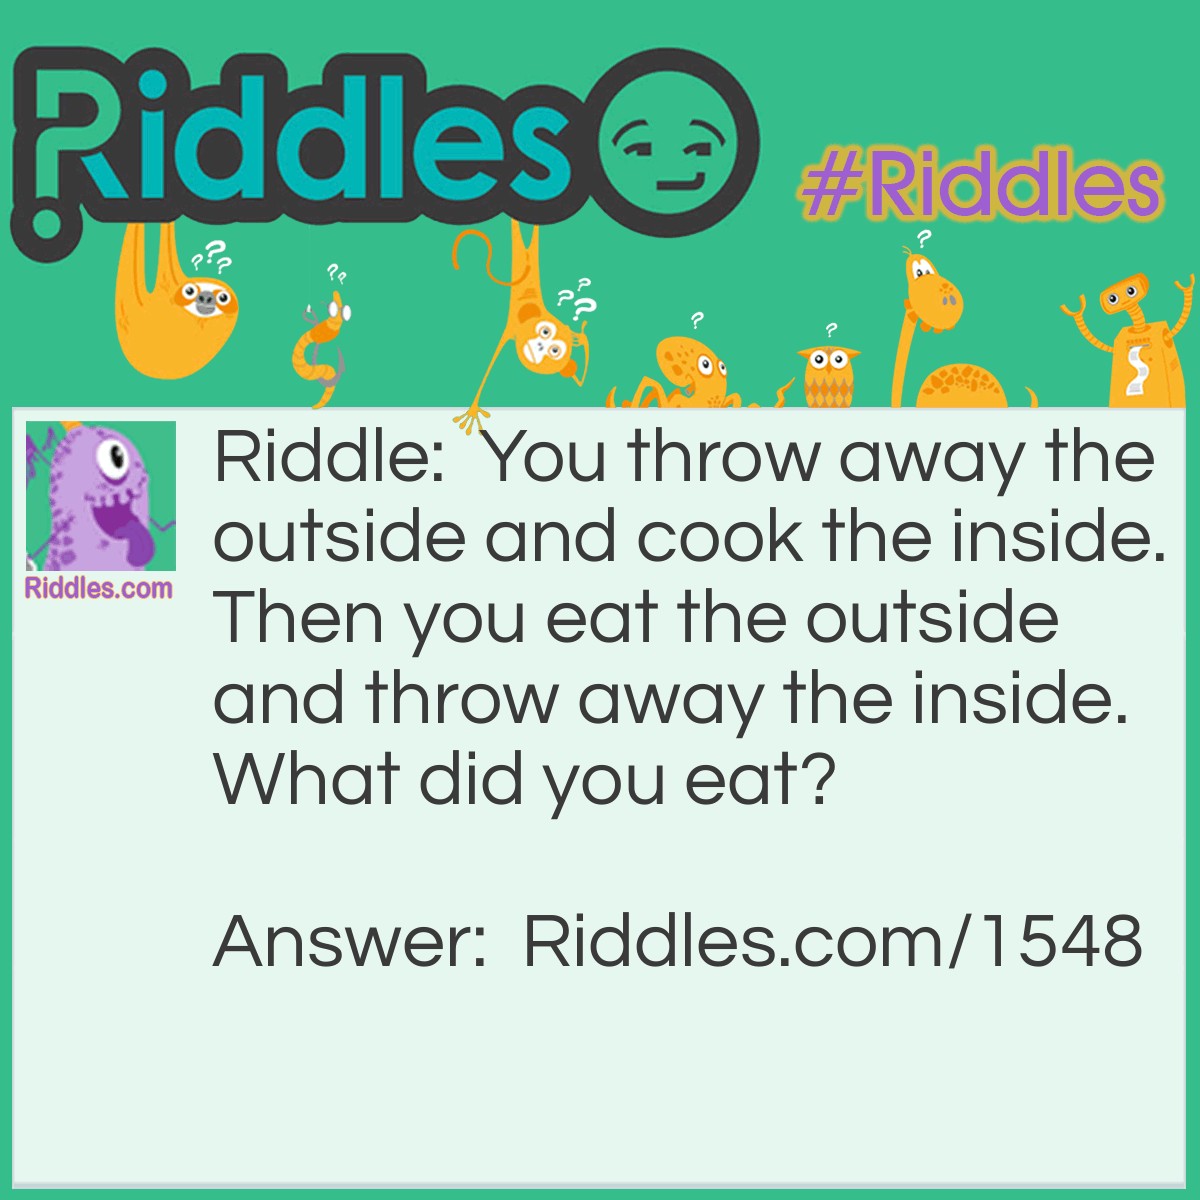 Riddle: You throw away the outside and cook the inside. Then you eat the outside and throw away the inside. What did you eat? Answer: An ear of corn.